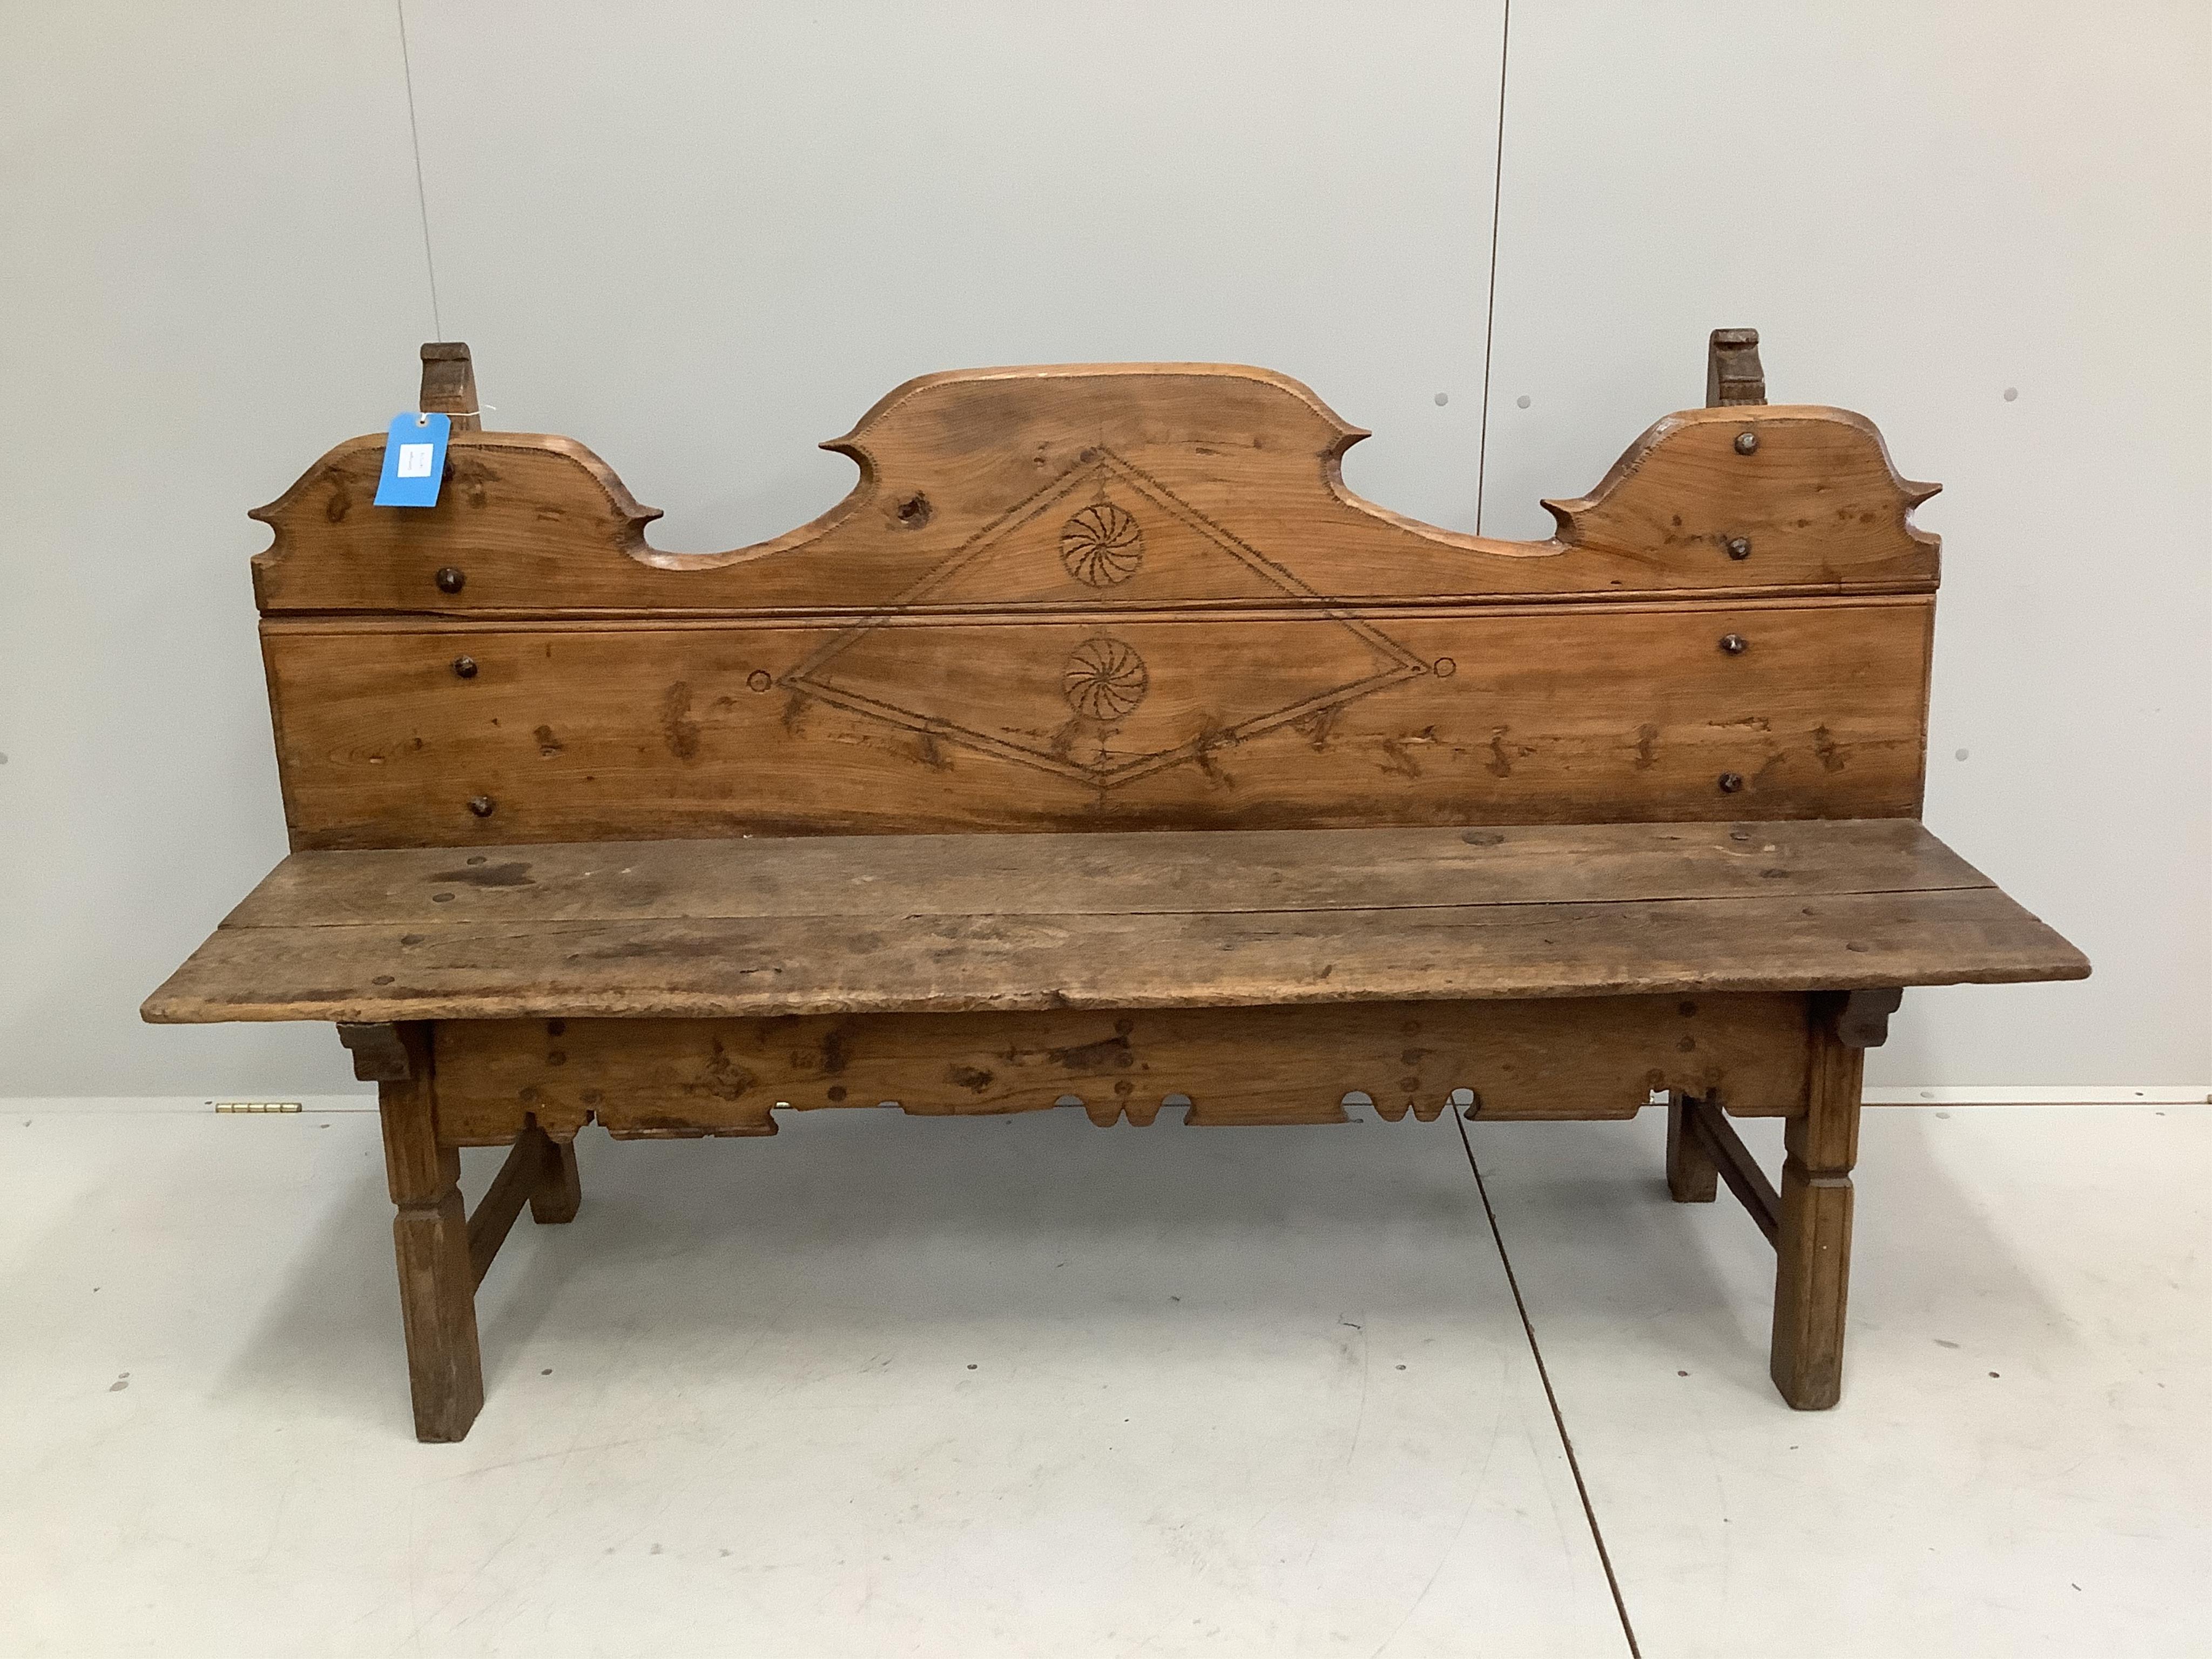 An 18th / early 19th century Provincial Spanish pine bench, width 174cm, depth 42cm, height 97cm. Condition - fair